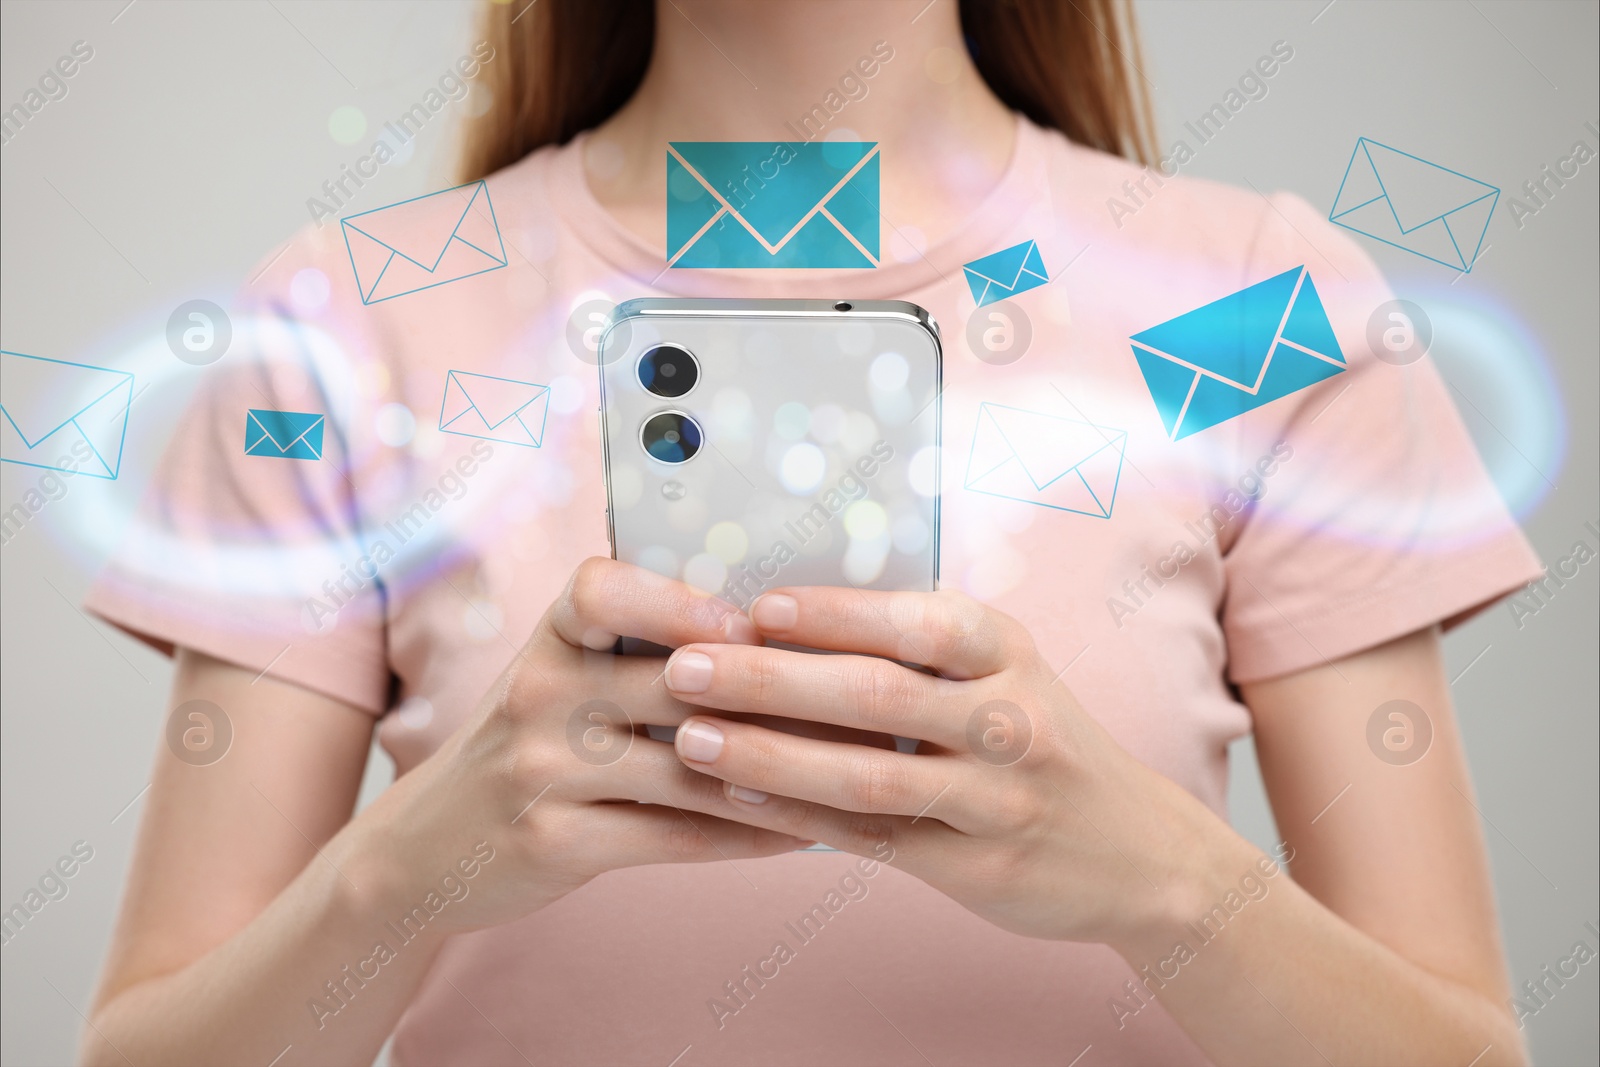 Image of Email. Woman using mobile phone on light background, closeup. Letter illustrations around device